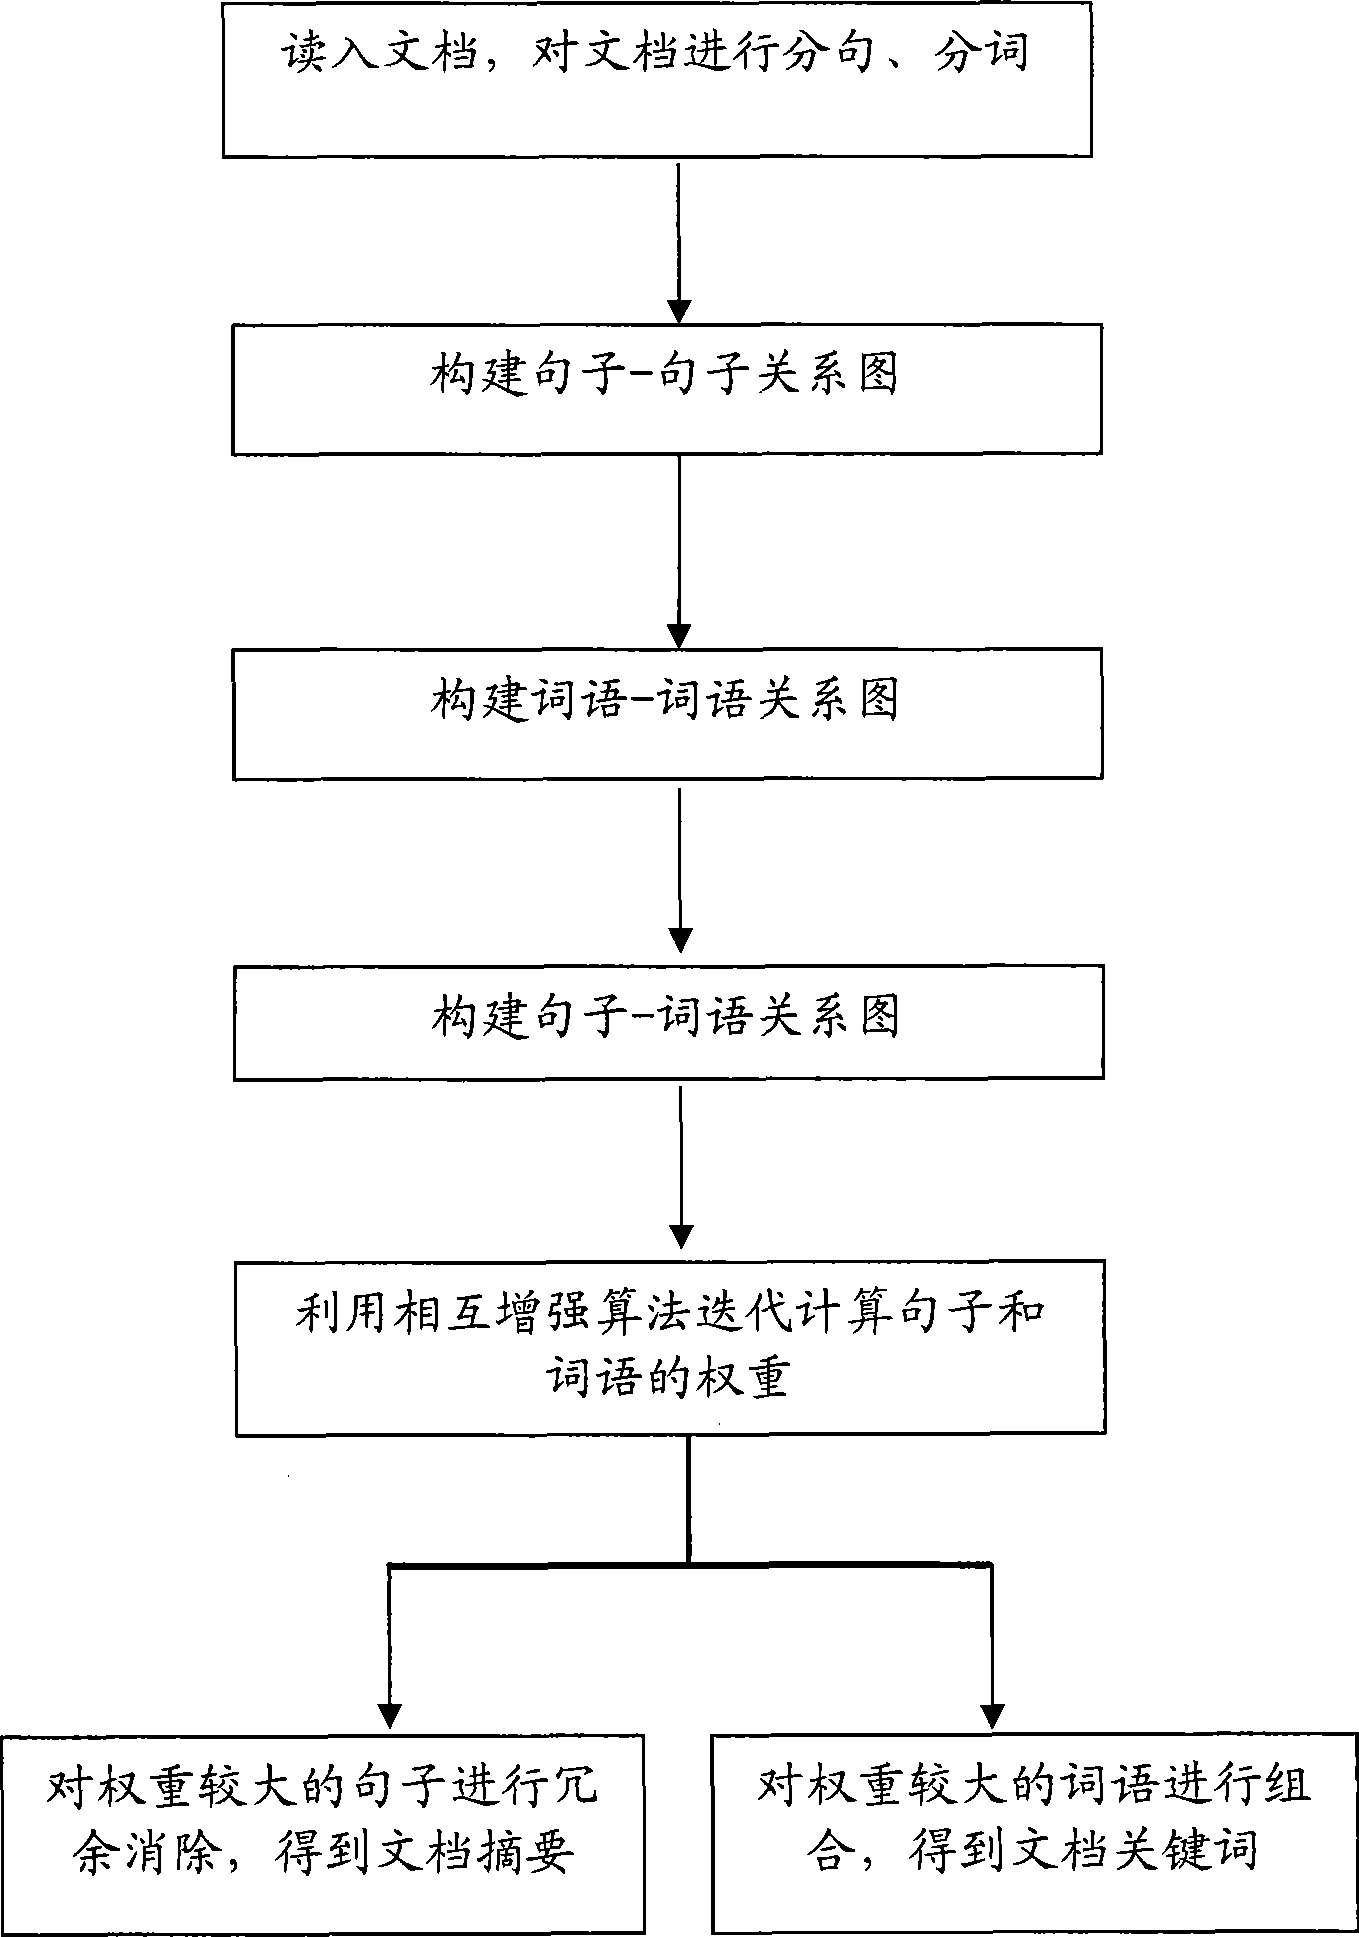 Method and system for simultaneously abstracting document summarization and key words